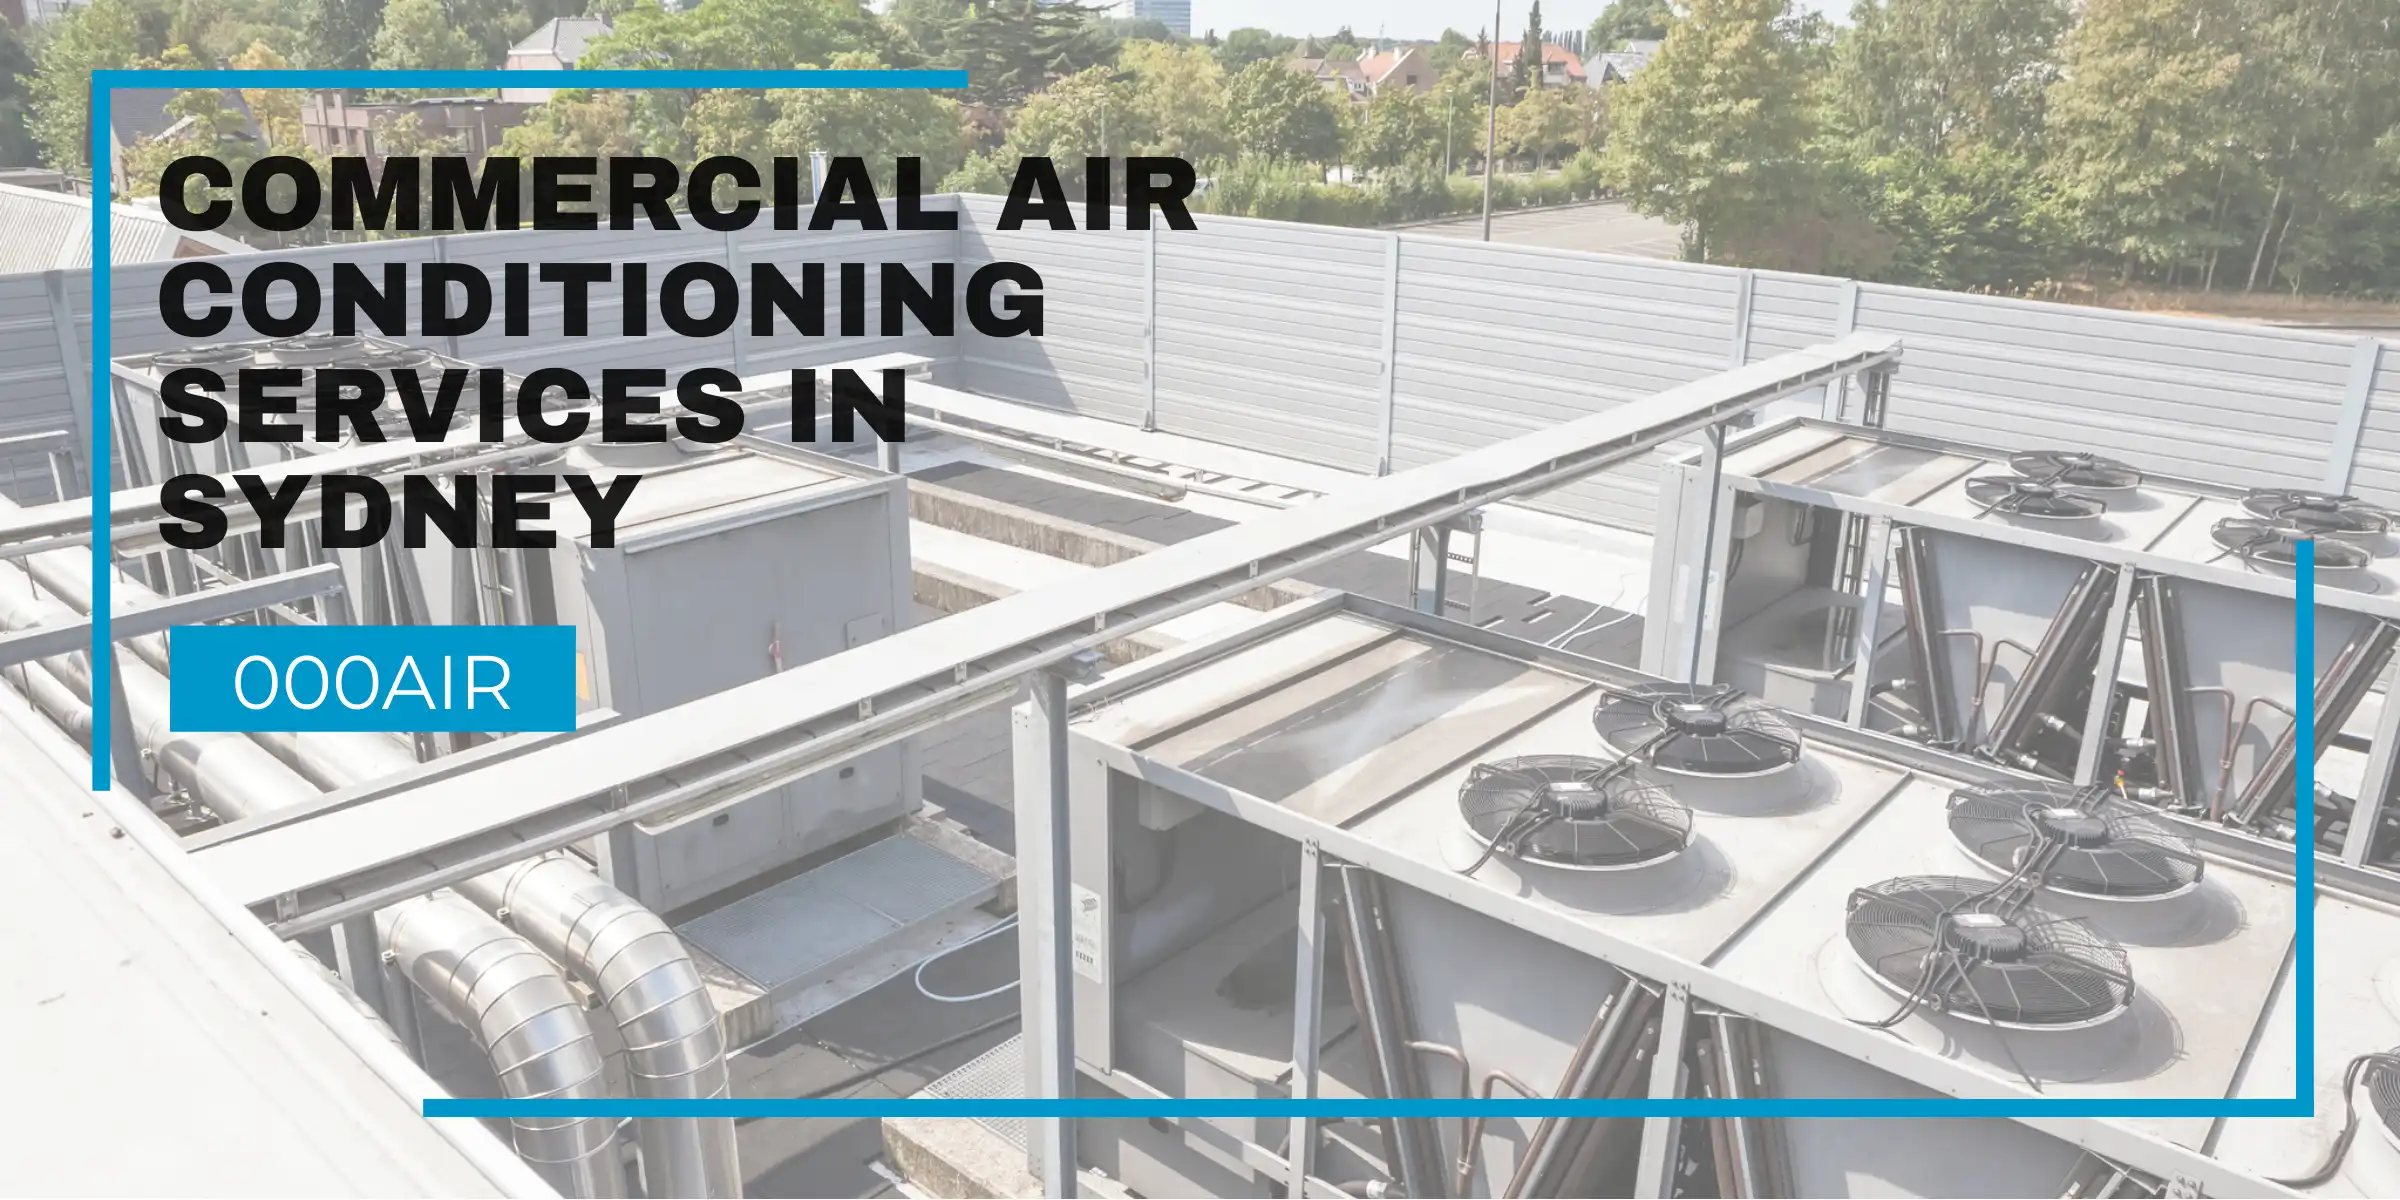 Commercial air conditioning services in Sydney